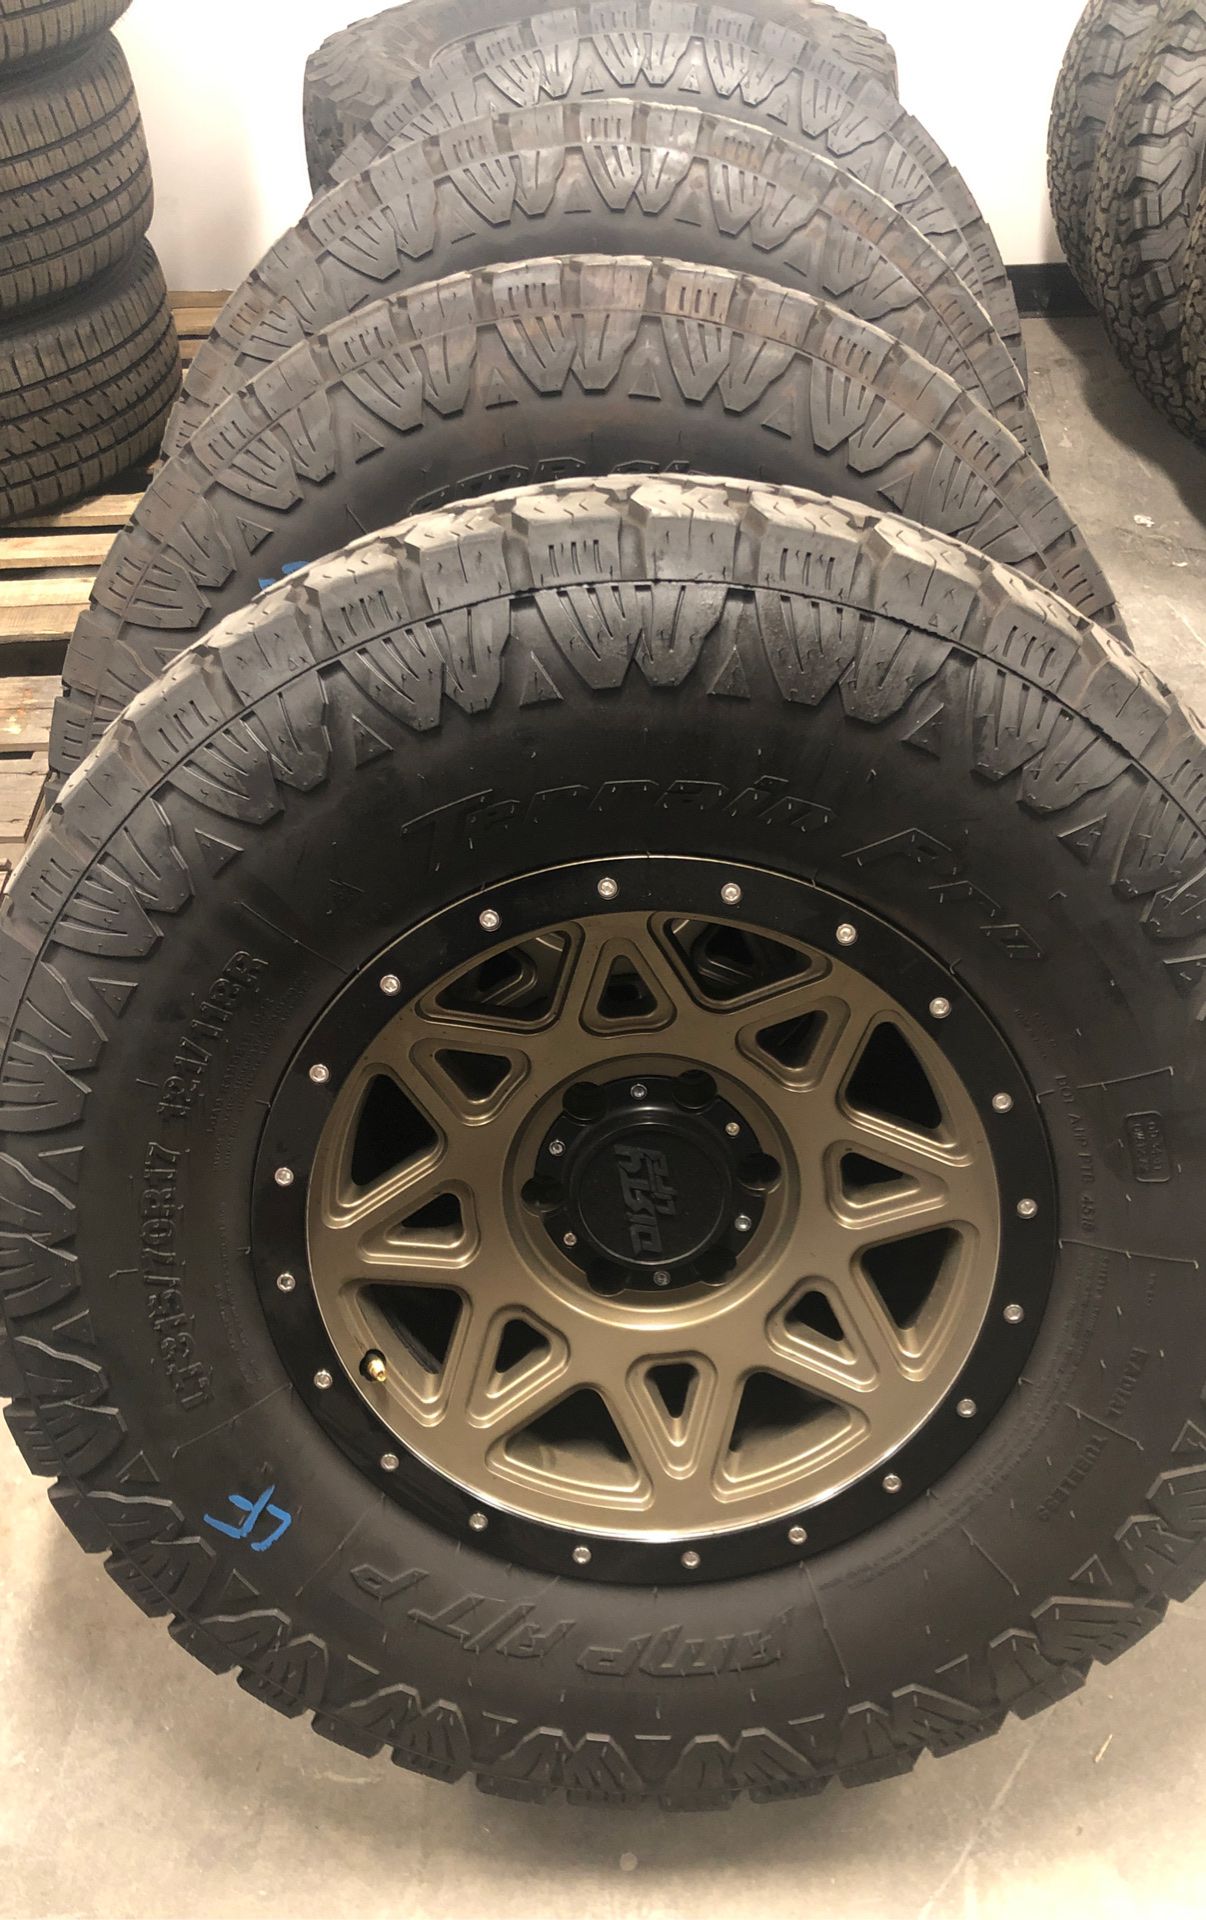 Dirty life rims, AMP A/T tires